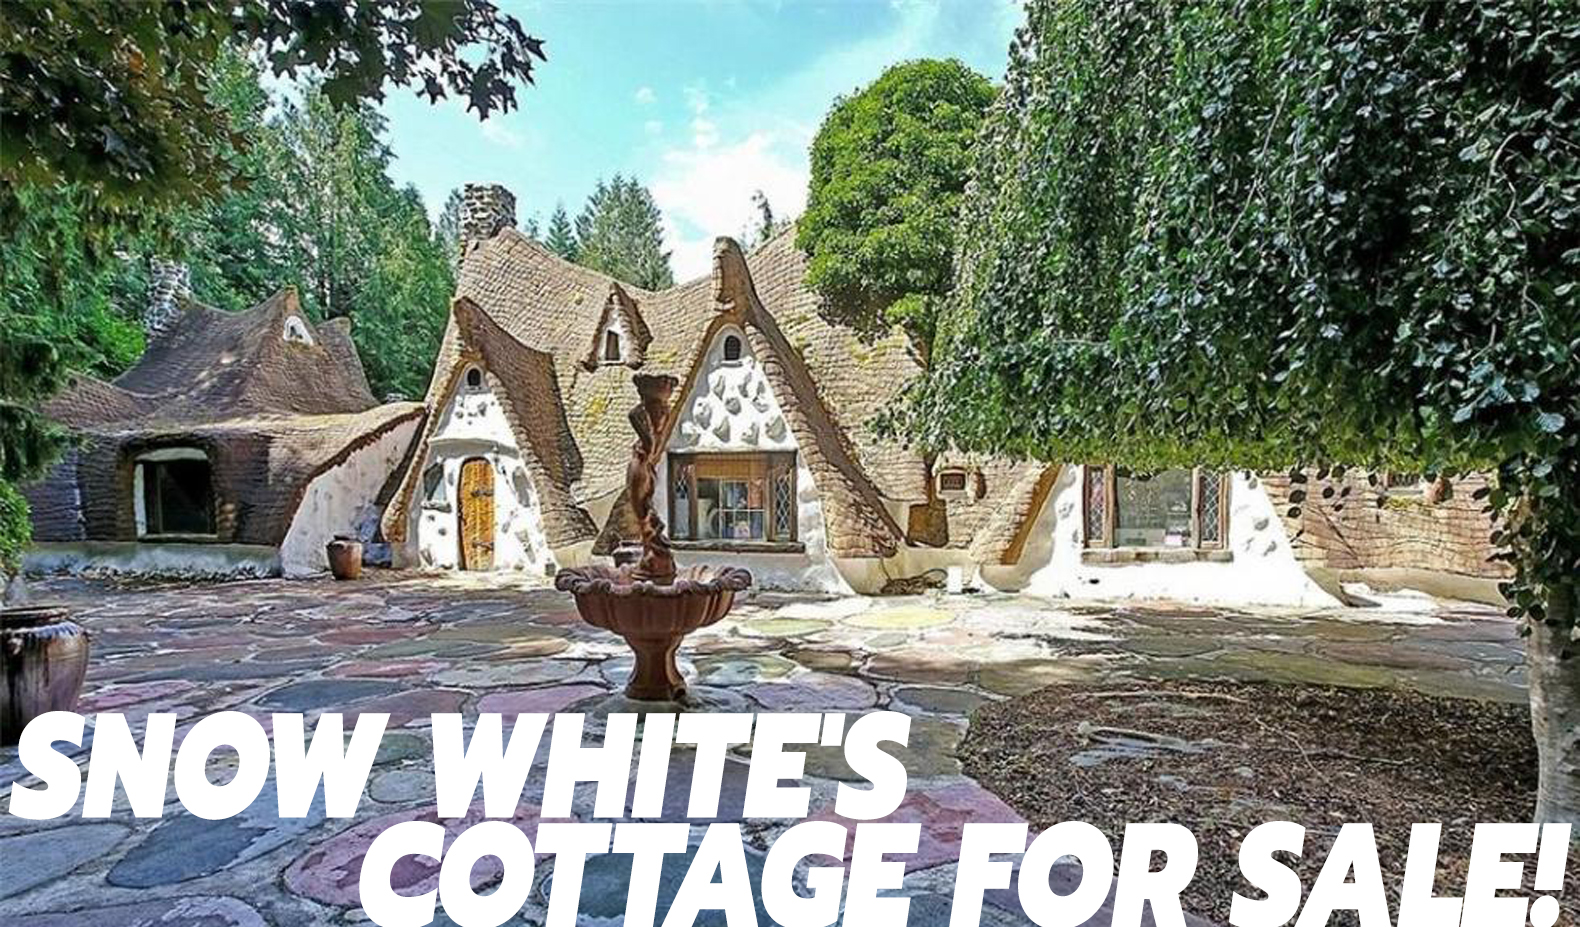 Walt Disney's Snow White and the Seven Dwarfs Cottage Is For Sale!